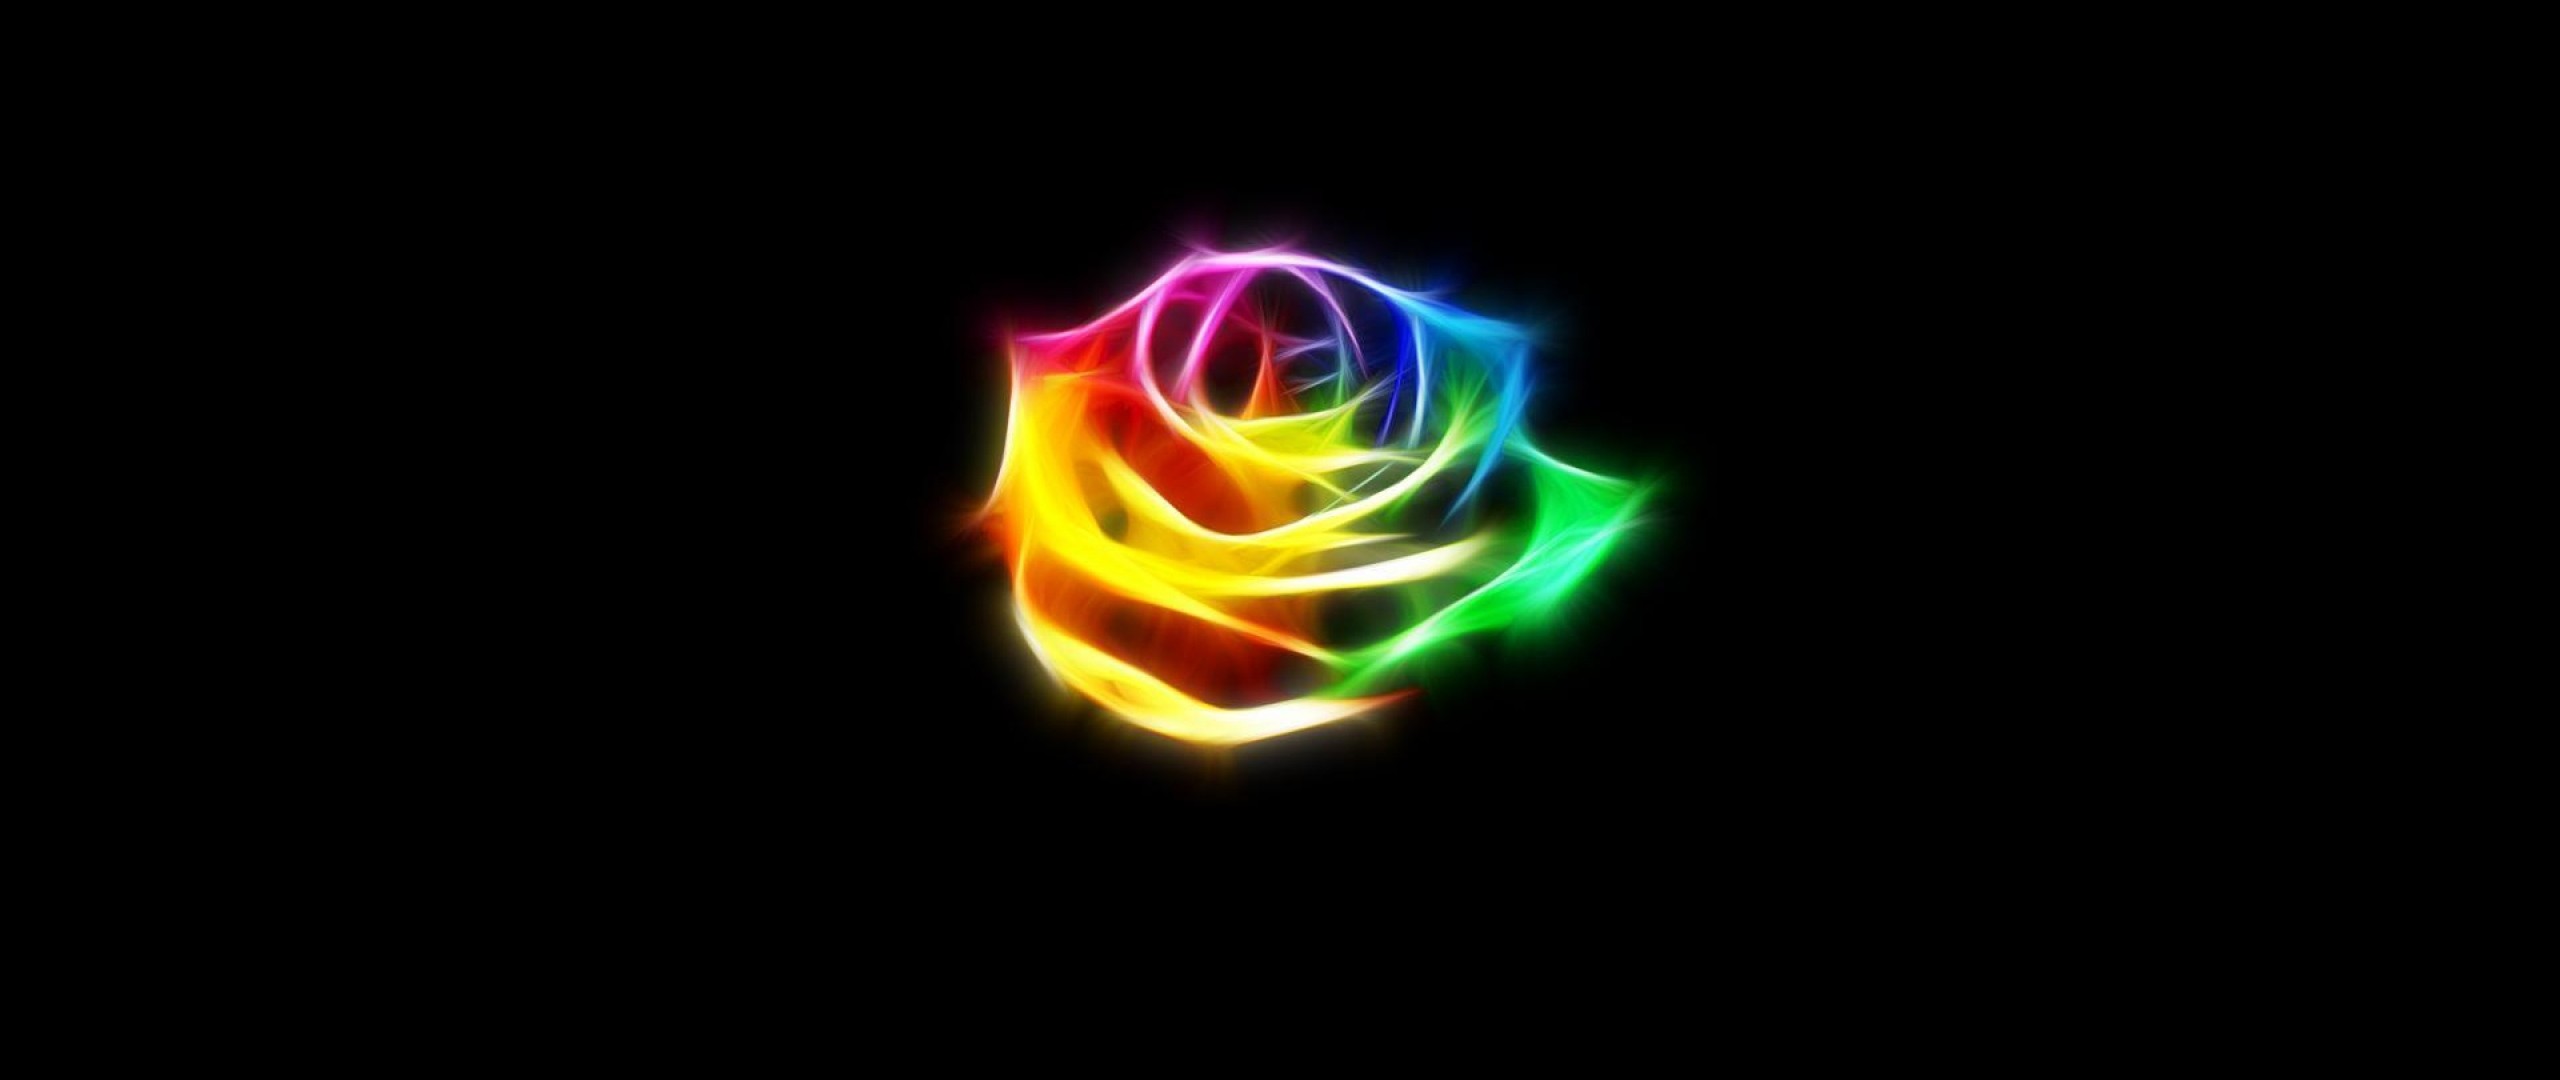 2560x1080  Wallpaper fire, fire flower, roses, different colors, black